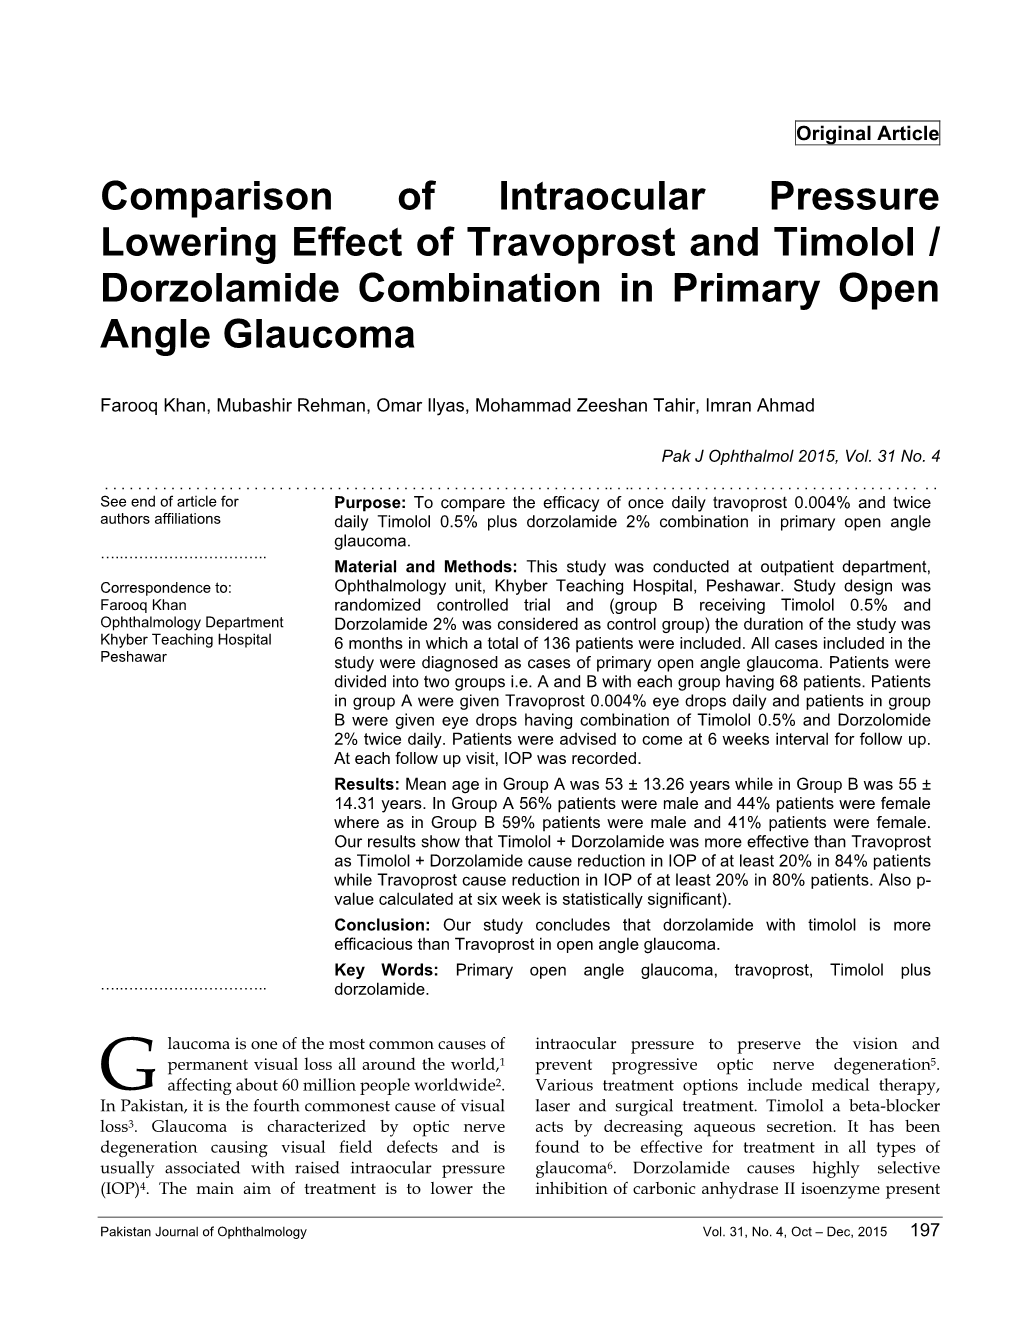 Comparison of Intraocular Pressure Lowering Effect of Travoprost and Timolol / Dorzolamide Combination in Primary Open Angle Glaucoma